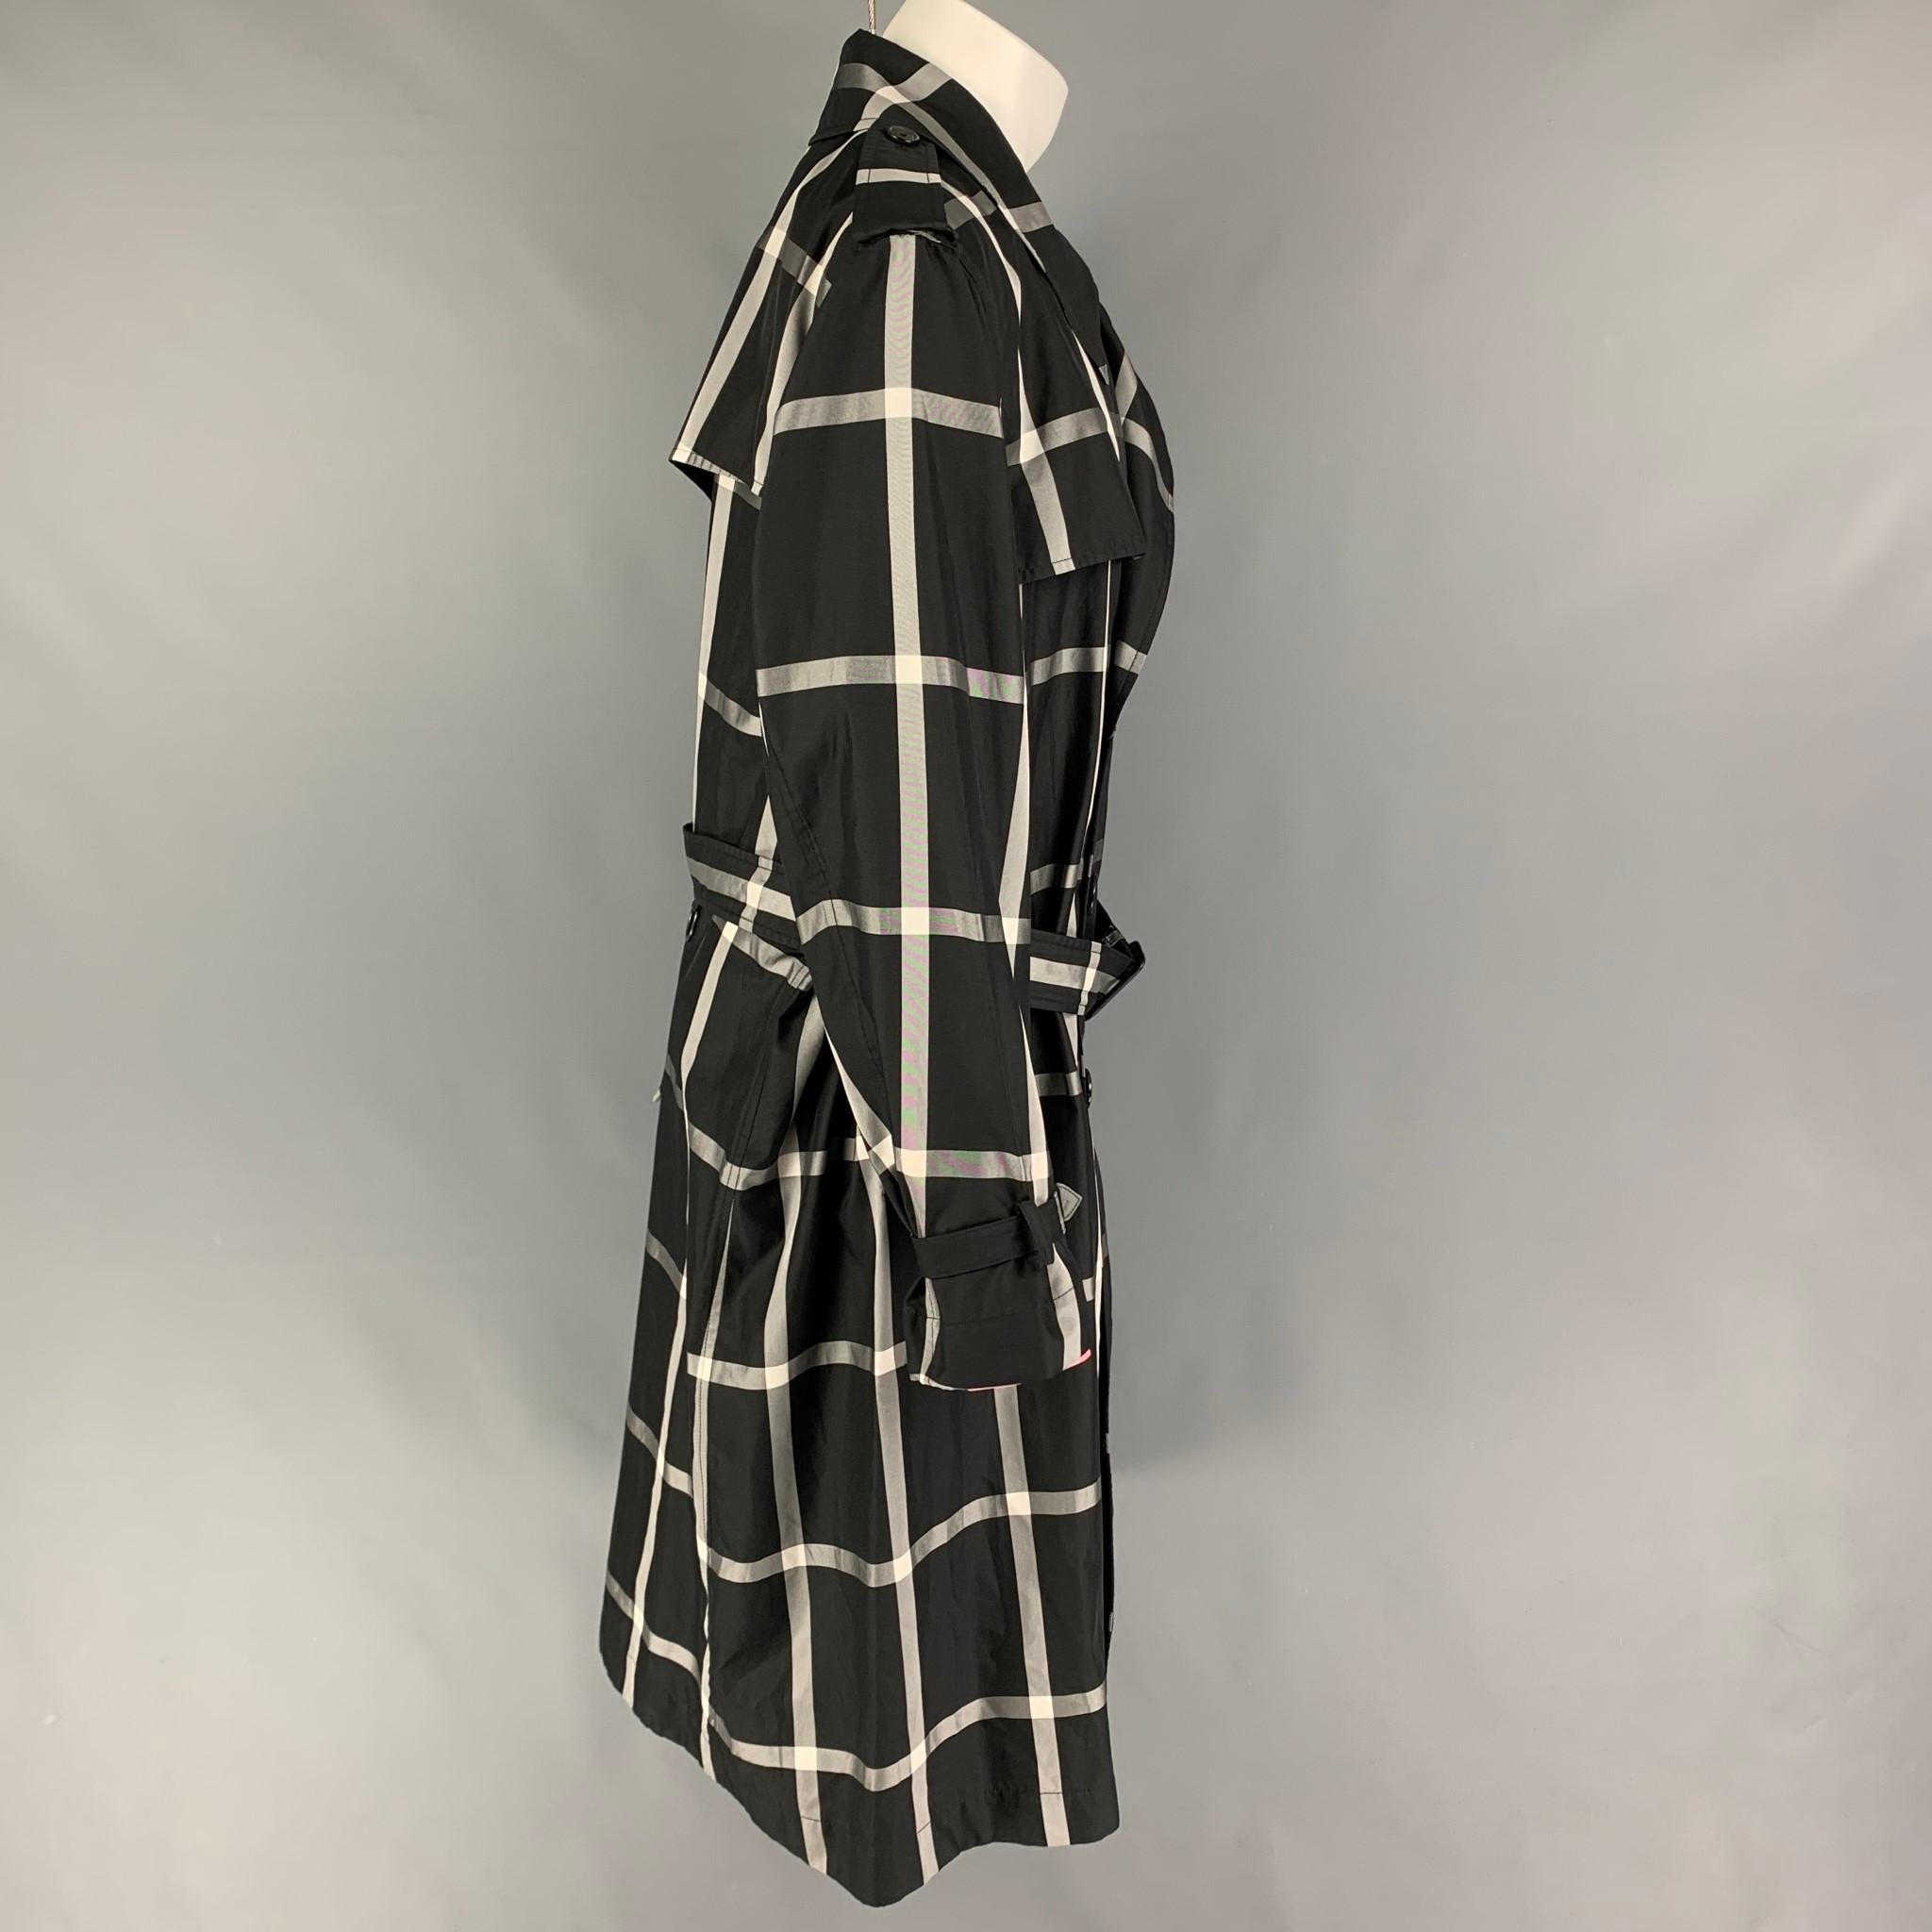 ALEXANDER McQUEEN trenchcoat comes in a black & white windowpane polyester / silk featuring a belted style, storm flap, slit pockets, epaulettes, and a double breasted closure. Made in Italy. 

New With Tags. 
Marked: 48
Original Retail Price: